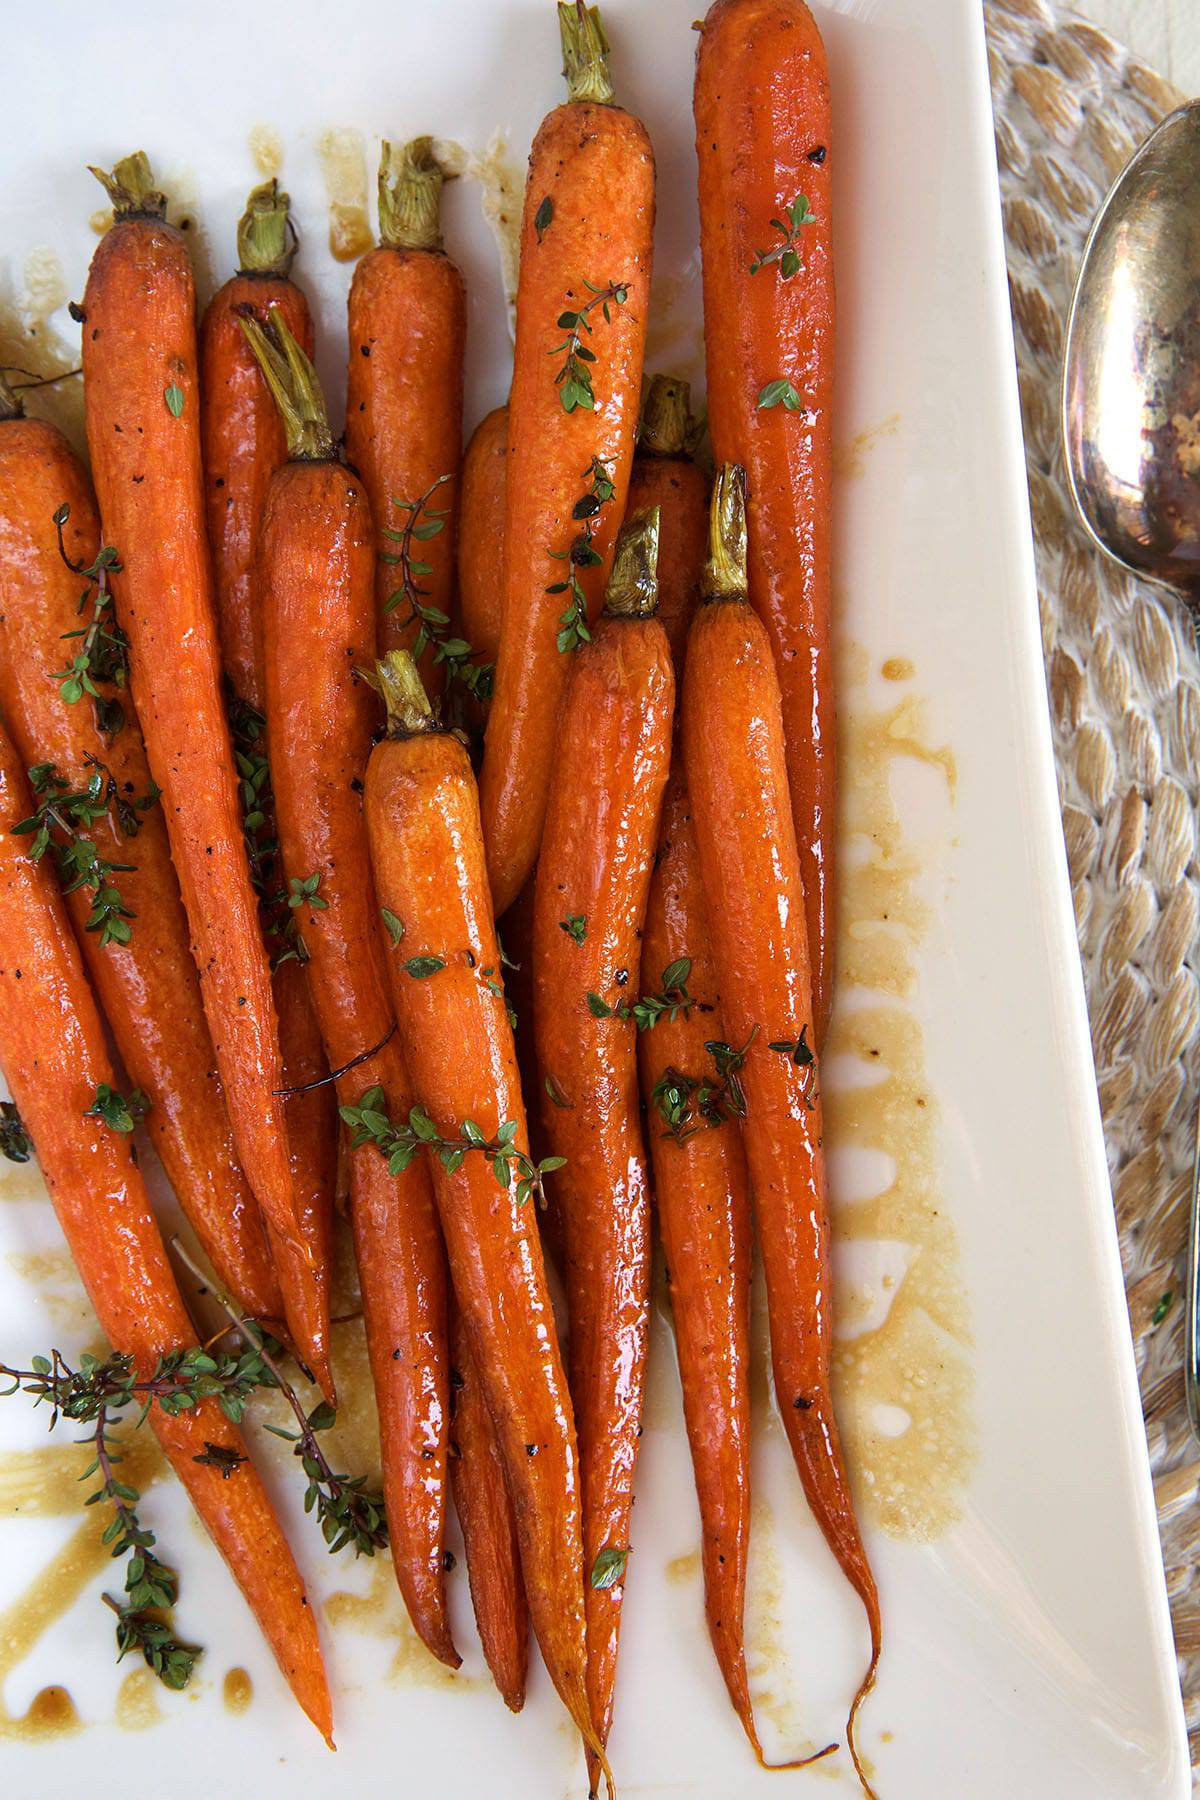 Baked carrots are placed on a serving platter.